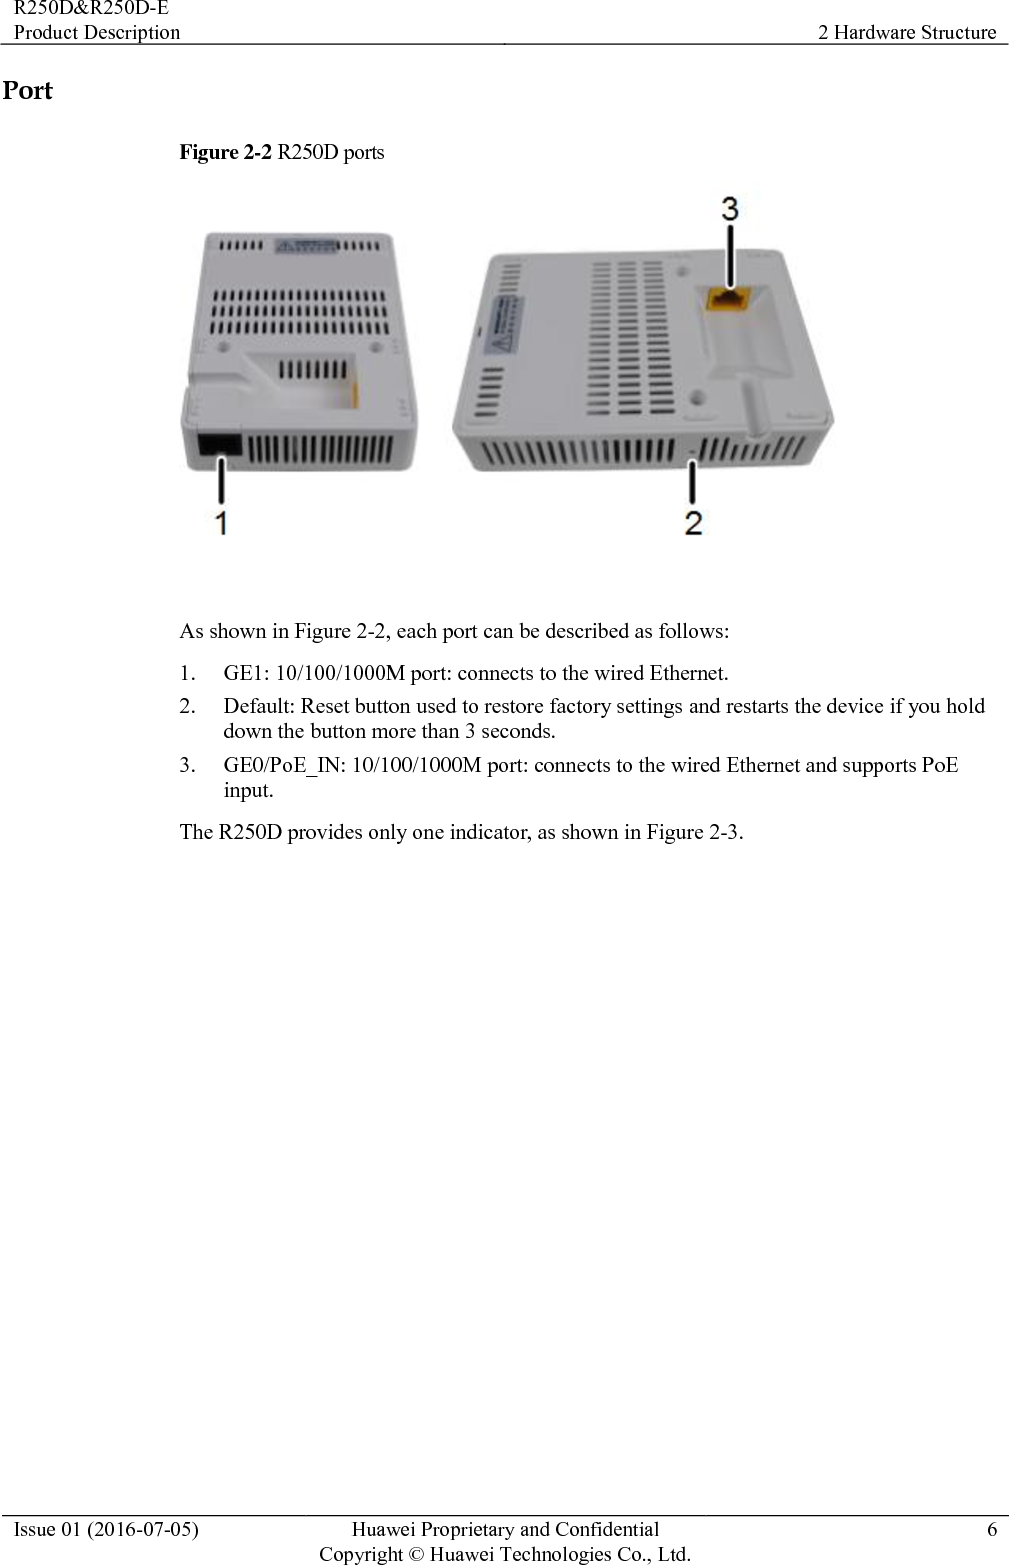 R250D&amp;R250D-E Product Description 2 Hardware Structure  Issue 01 (2016-07-05) Huawei Proprietary and Confidential                                     Copyright © Huawei Technologies Co., Ltd. 6  Port Figure 2-2 R250D ports   As shown in Figure 2-2, each port can be described as follows: 1. GE1: 10/100/1000M port: connects to the wired Ethernet. 2. Default: Reset button used to restore factory settings and restarts the device if you hold down the button more than 3 seconds. 3. GE0/PoE_IN: 10/100/1000M port: connects to the wired Ethernet and supports PoE input. The R250D provides only one indicator, as shown in Figure 2-3. 